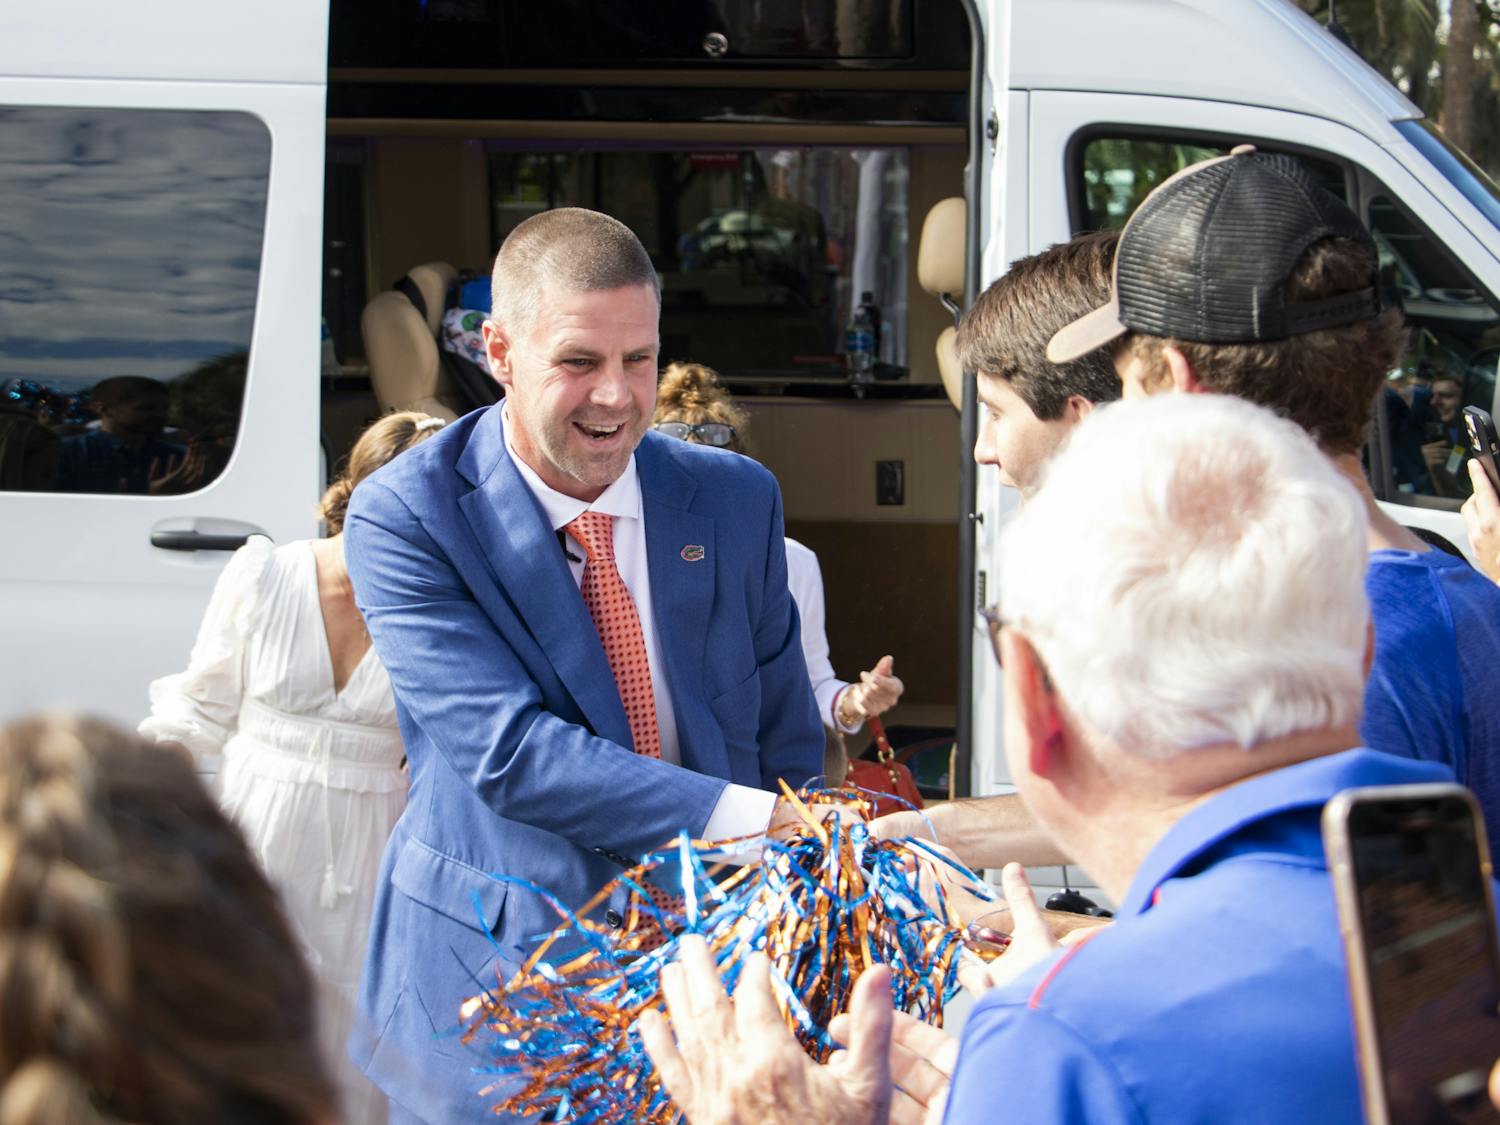 New Florida football coach Billy Napier greets fans during his first day on the job Sunday in Gainesville. Napier discussed his vision for the program during his first address to the media Friday afternoon.